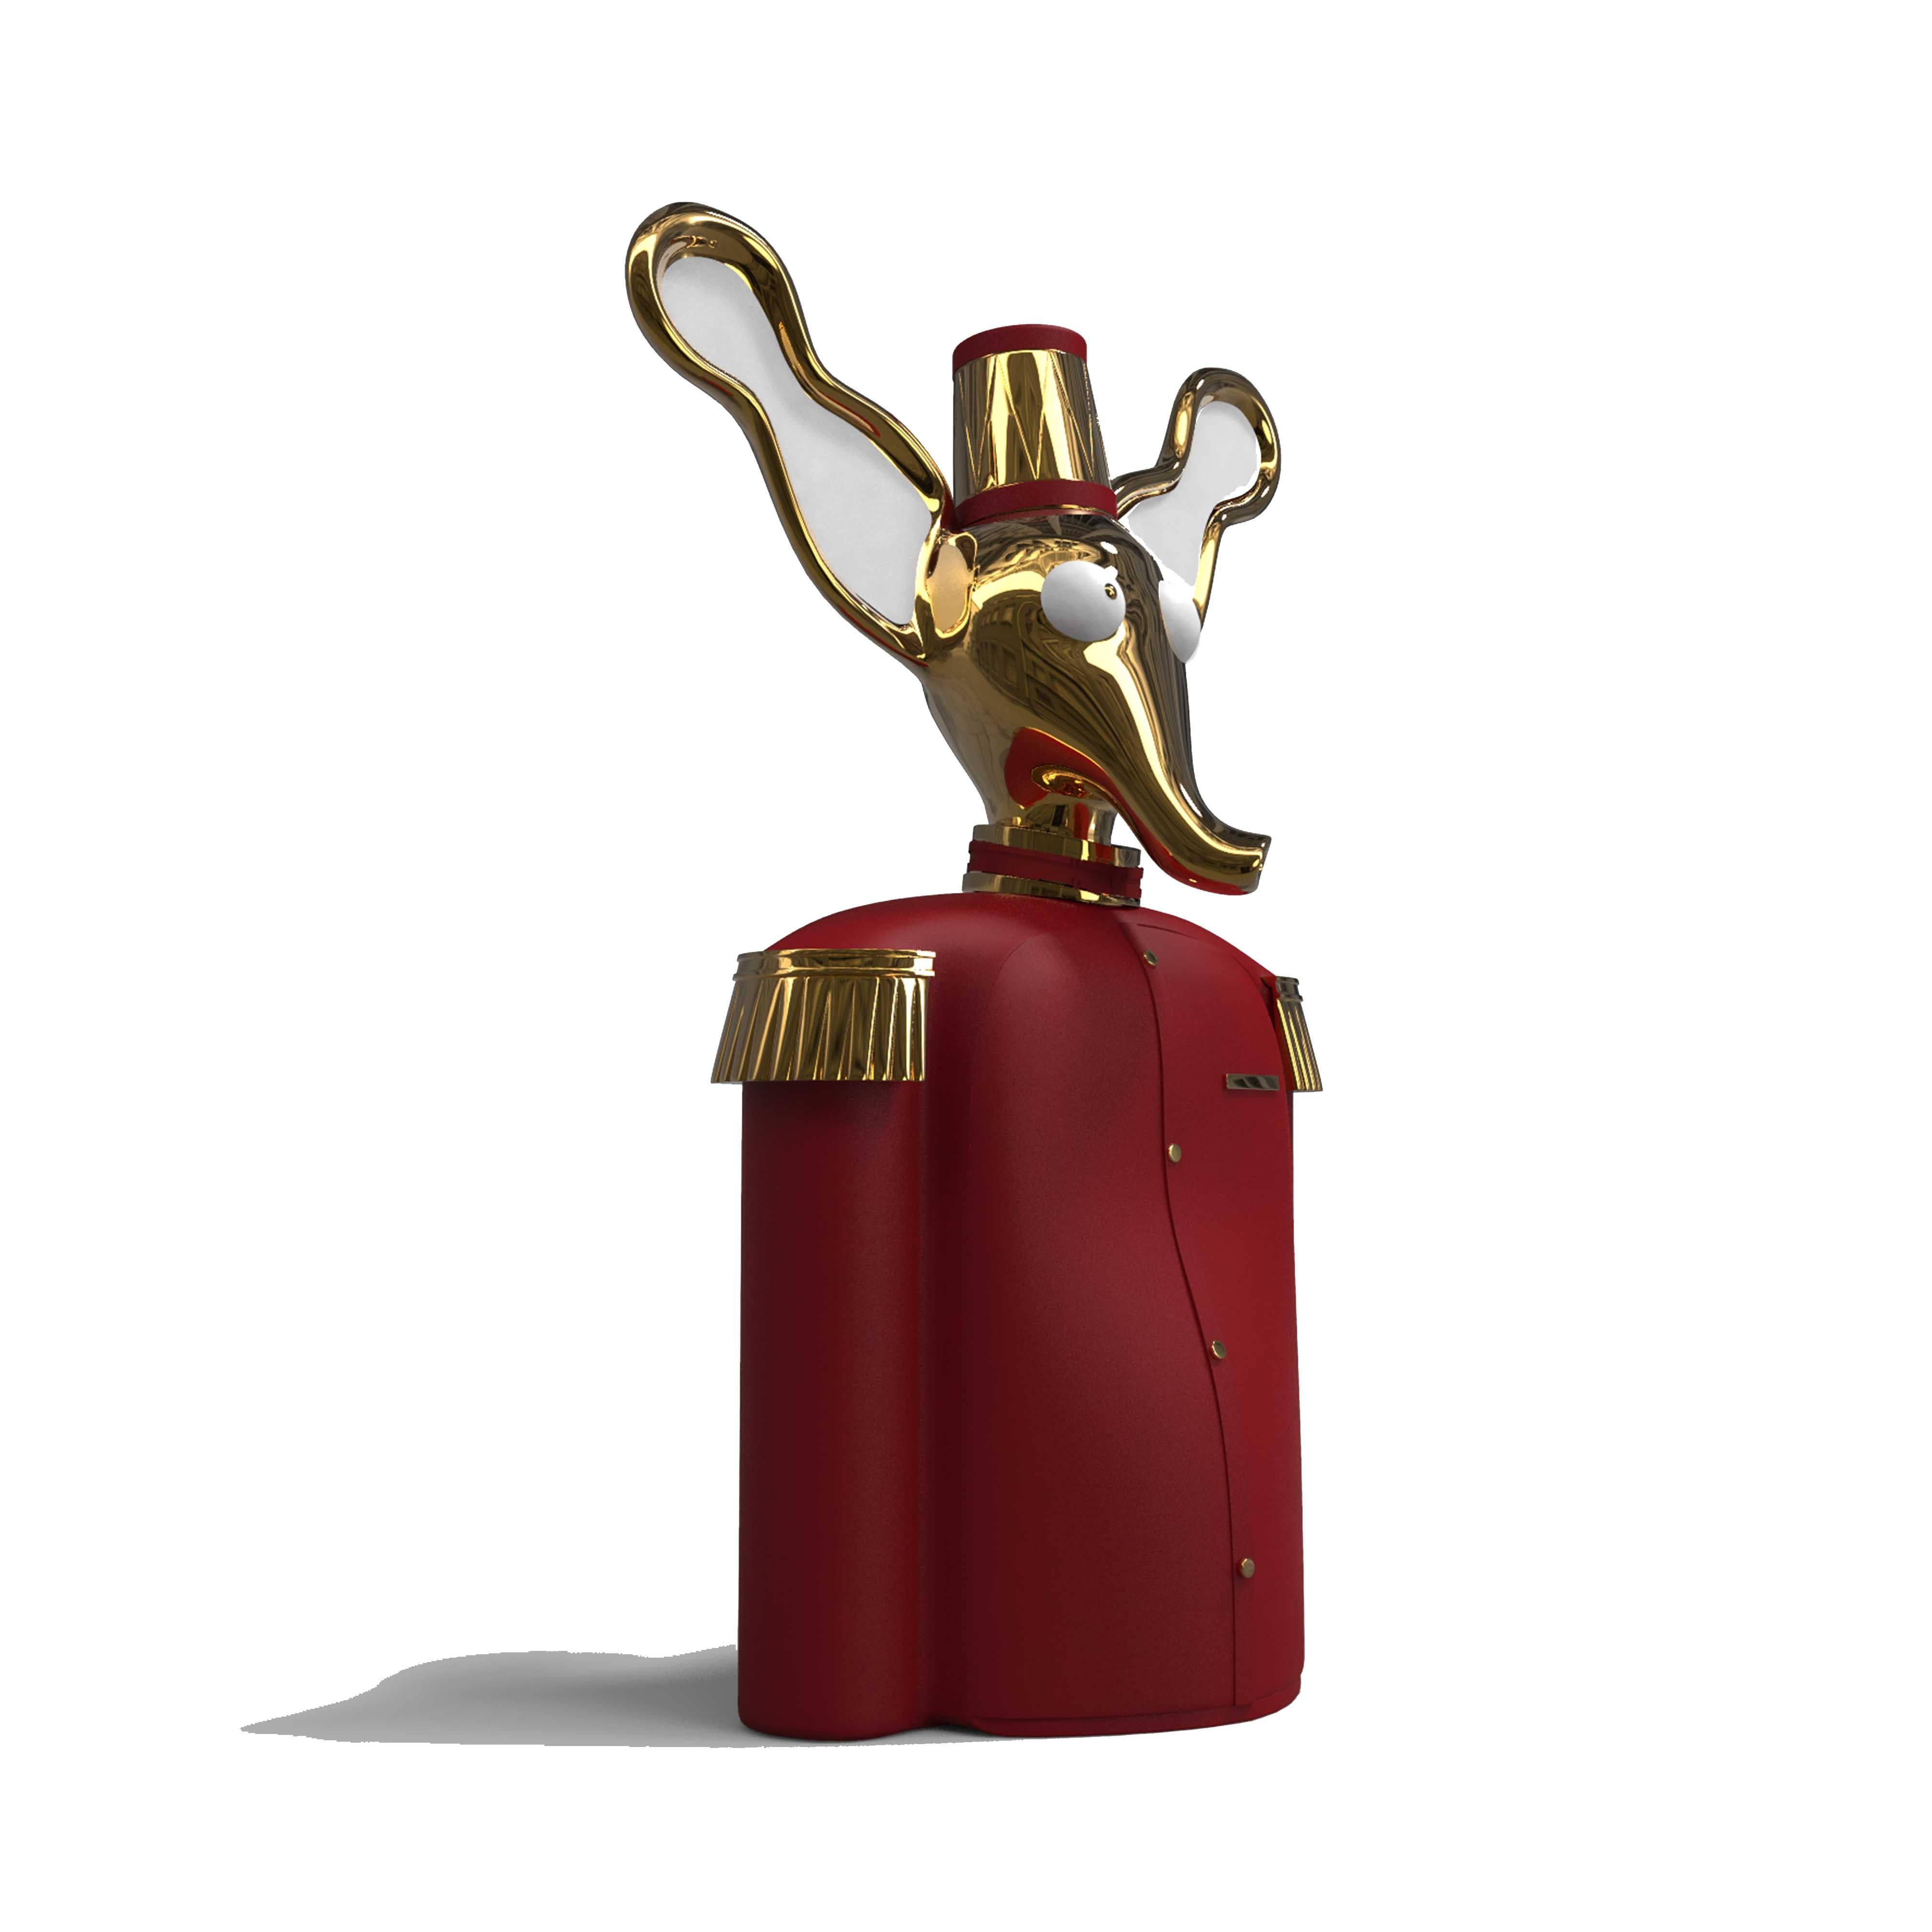 Elie red brass elephant bar storage cabinet by Matteo Cibic is a grand elephant with a lovable brass head and a smart red uniform. It opens up as a fantastic sculptural cabinet.

“Until one has loved an animal, a part of one’s soul remains